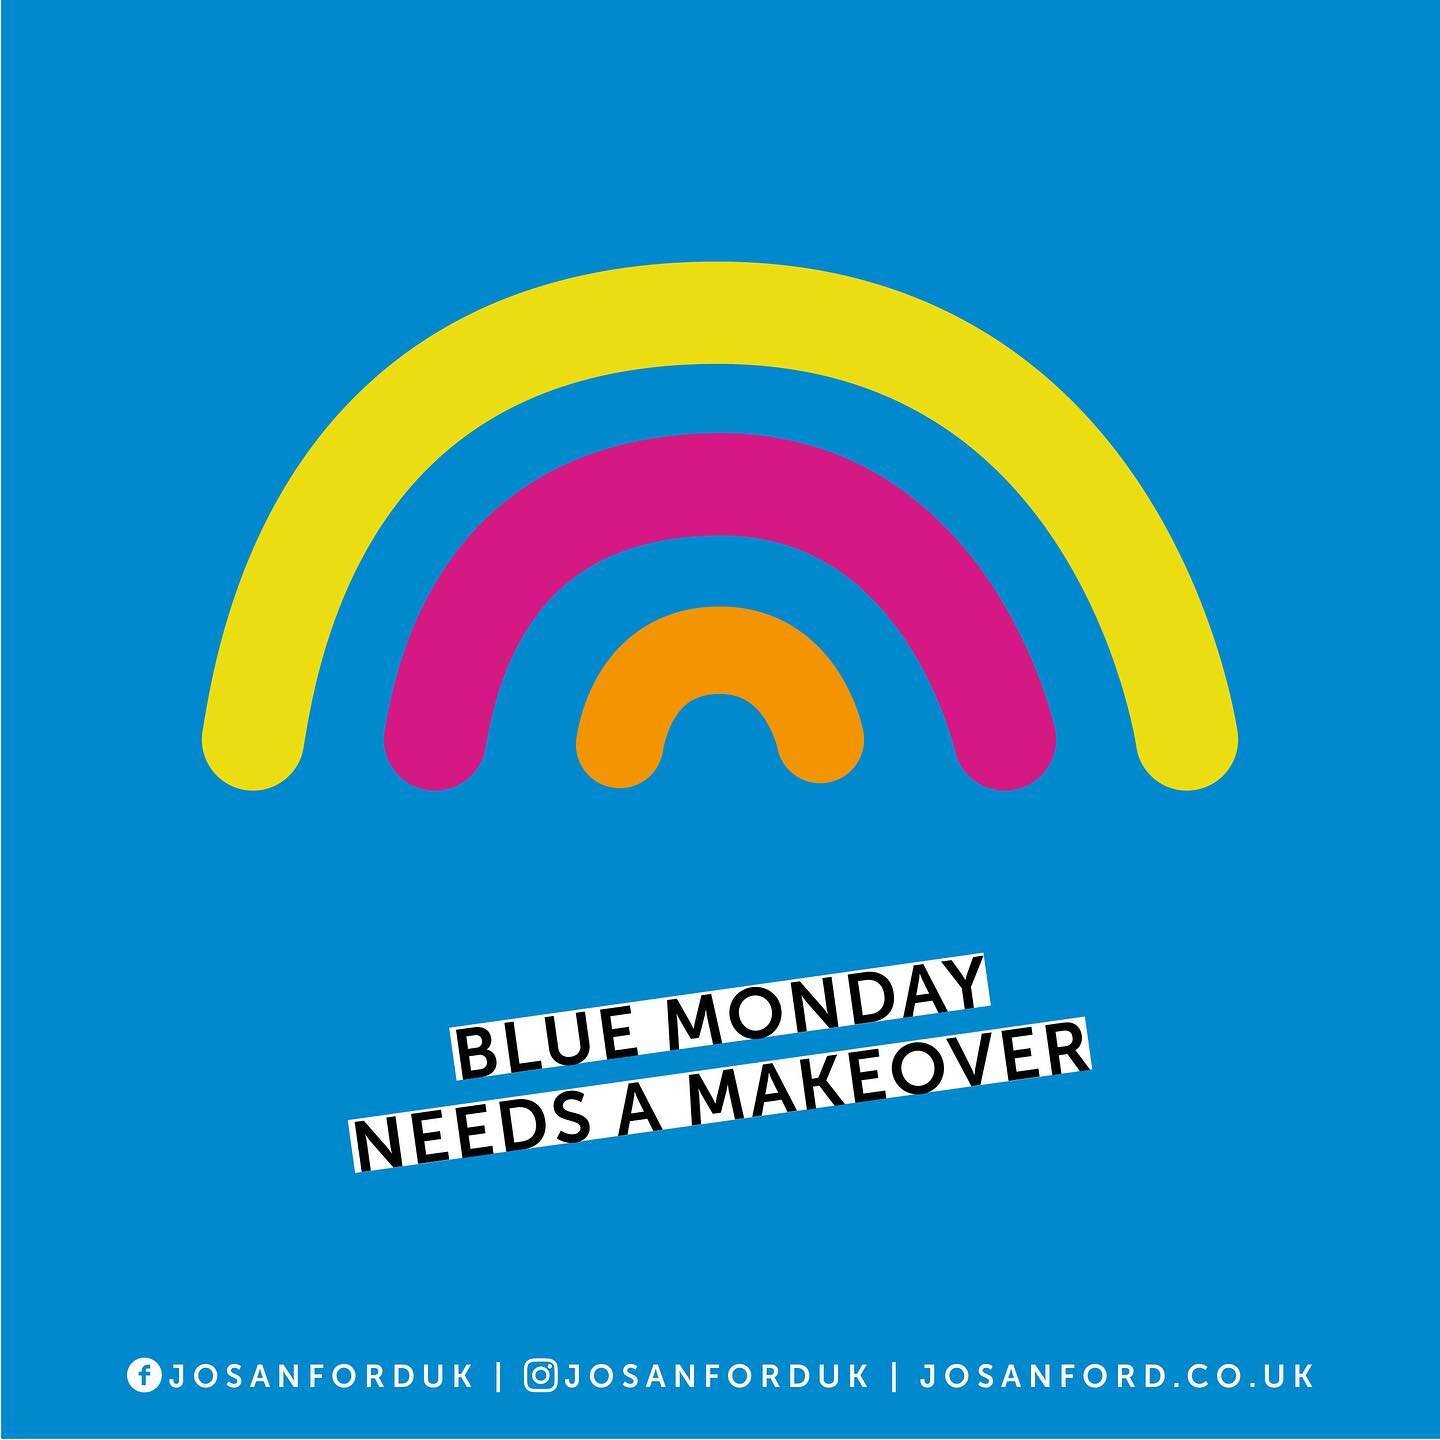 Blue Monday needs a makeover! Use colour to lift your mood and your companies!
We all need one every now and then. 
Does your logo and branding reflect your business? Why not get a makeover :)

#josanforduk #logodesigns #logodesigner #branding #desig